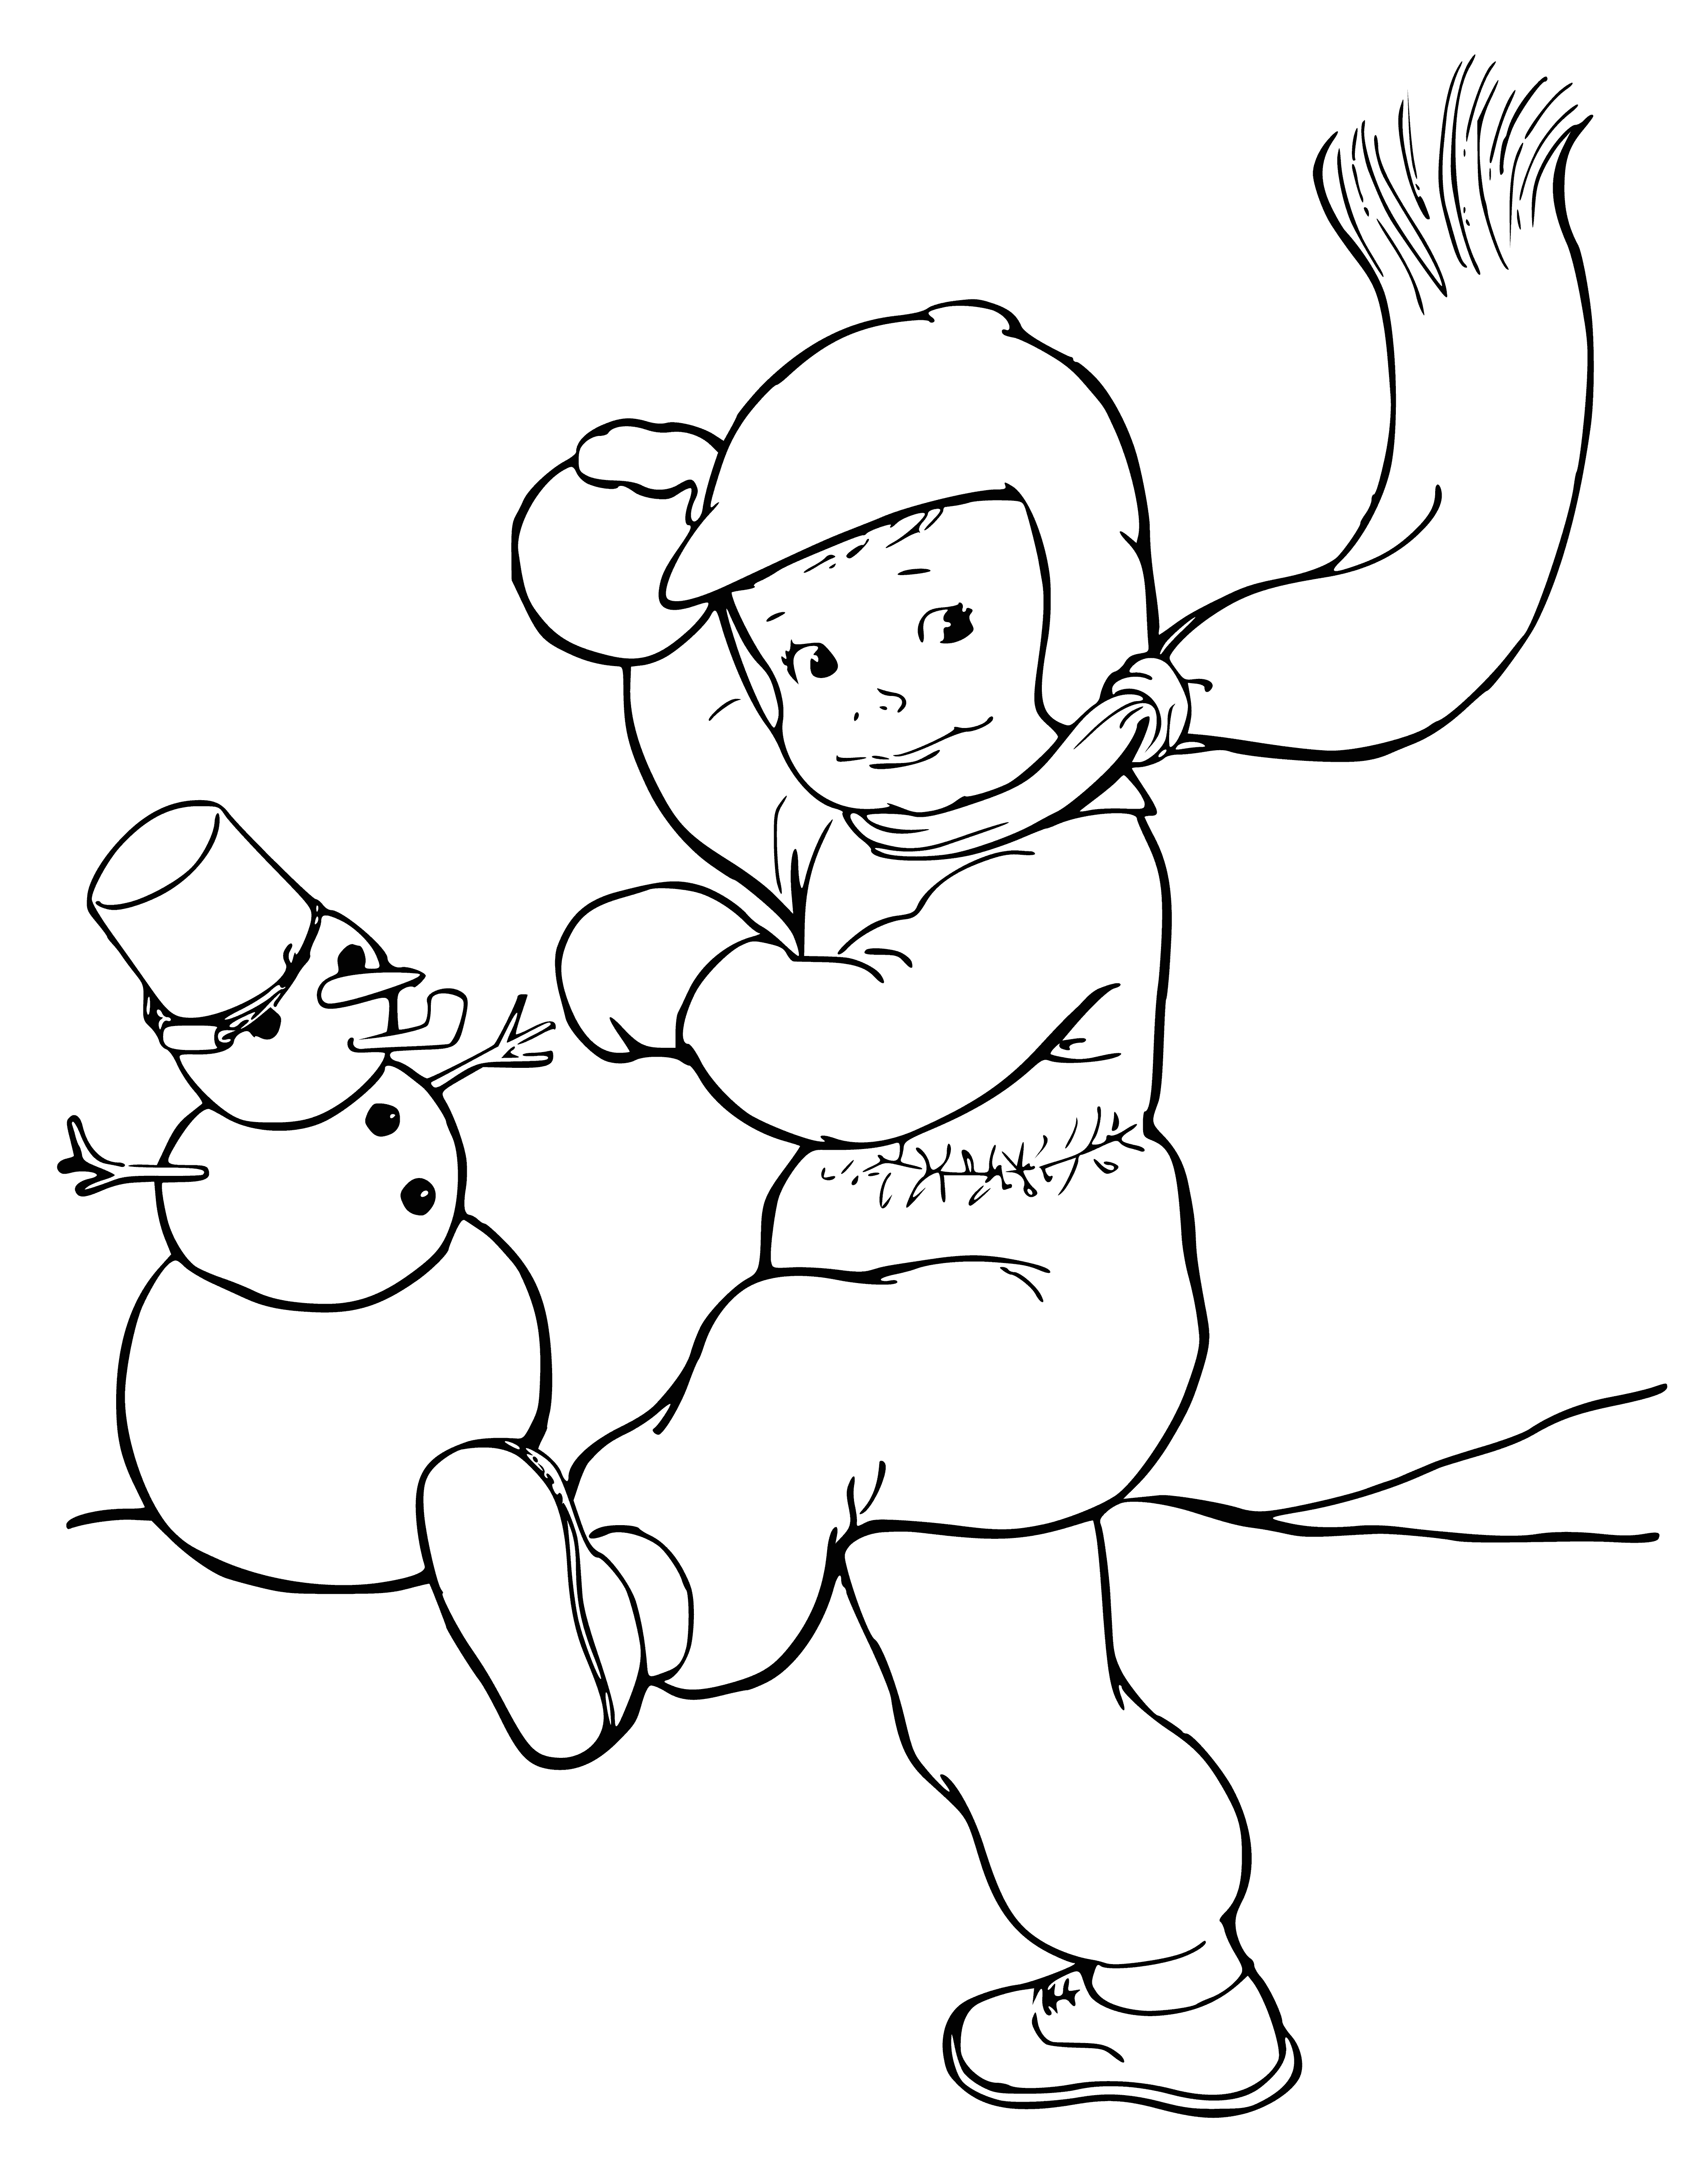 coloring page: Boy in heavy coat throws snowball in snow-filled landscape. Scarf and hat keep him warm.